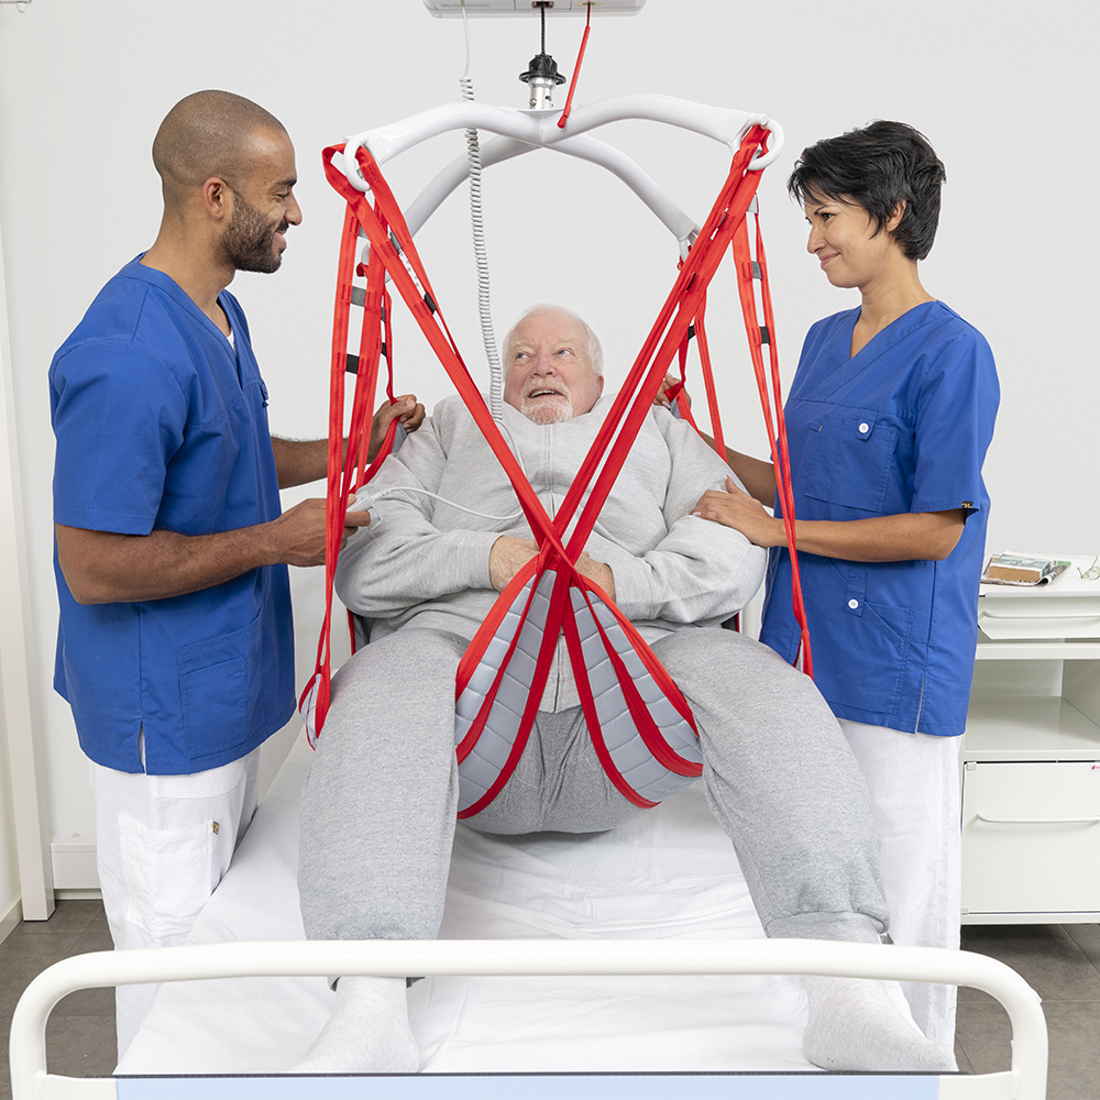 Molift RgoSling MediumBack Plus with user and carers front